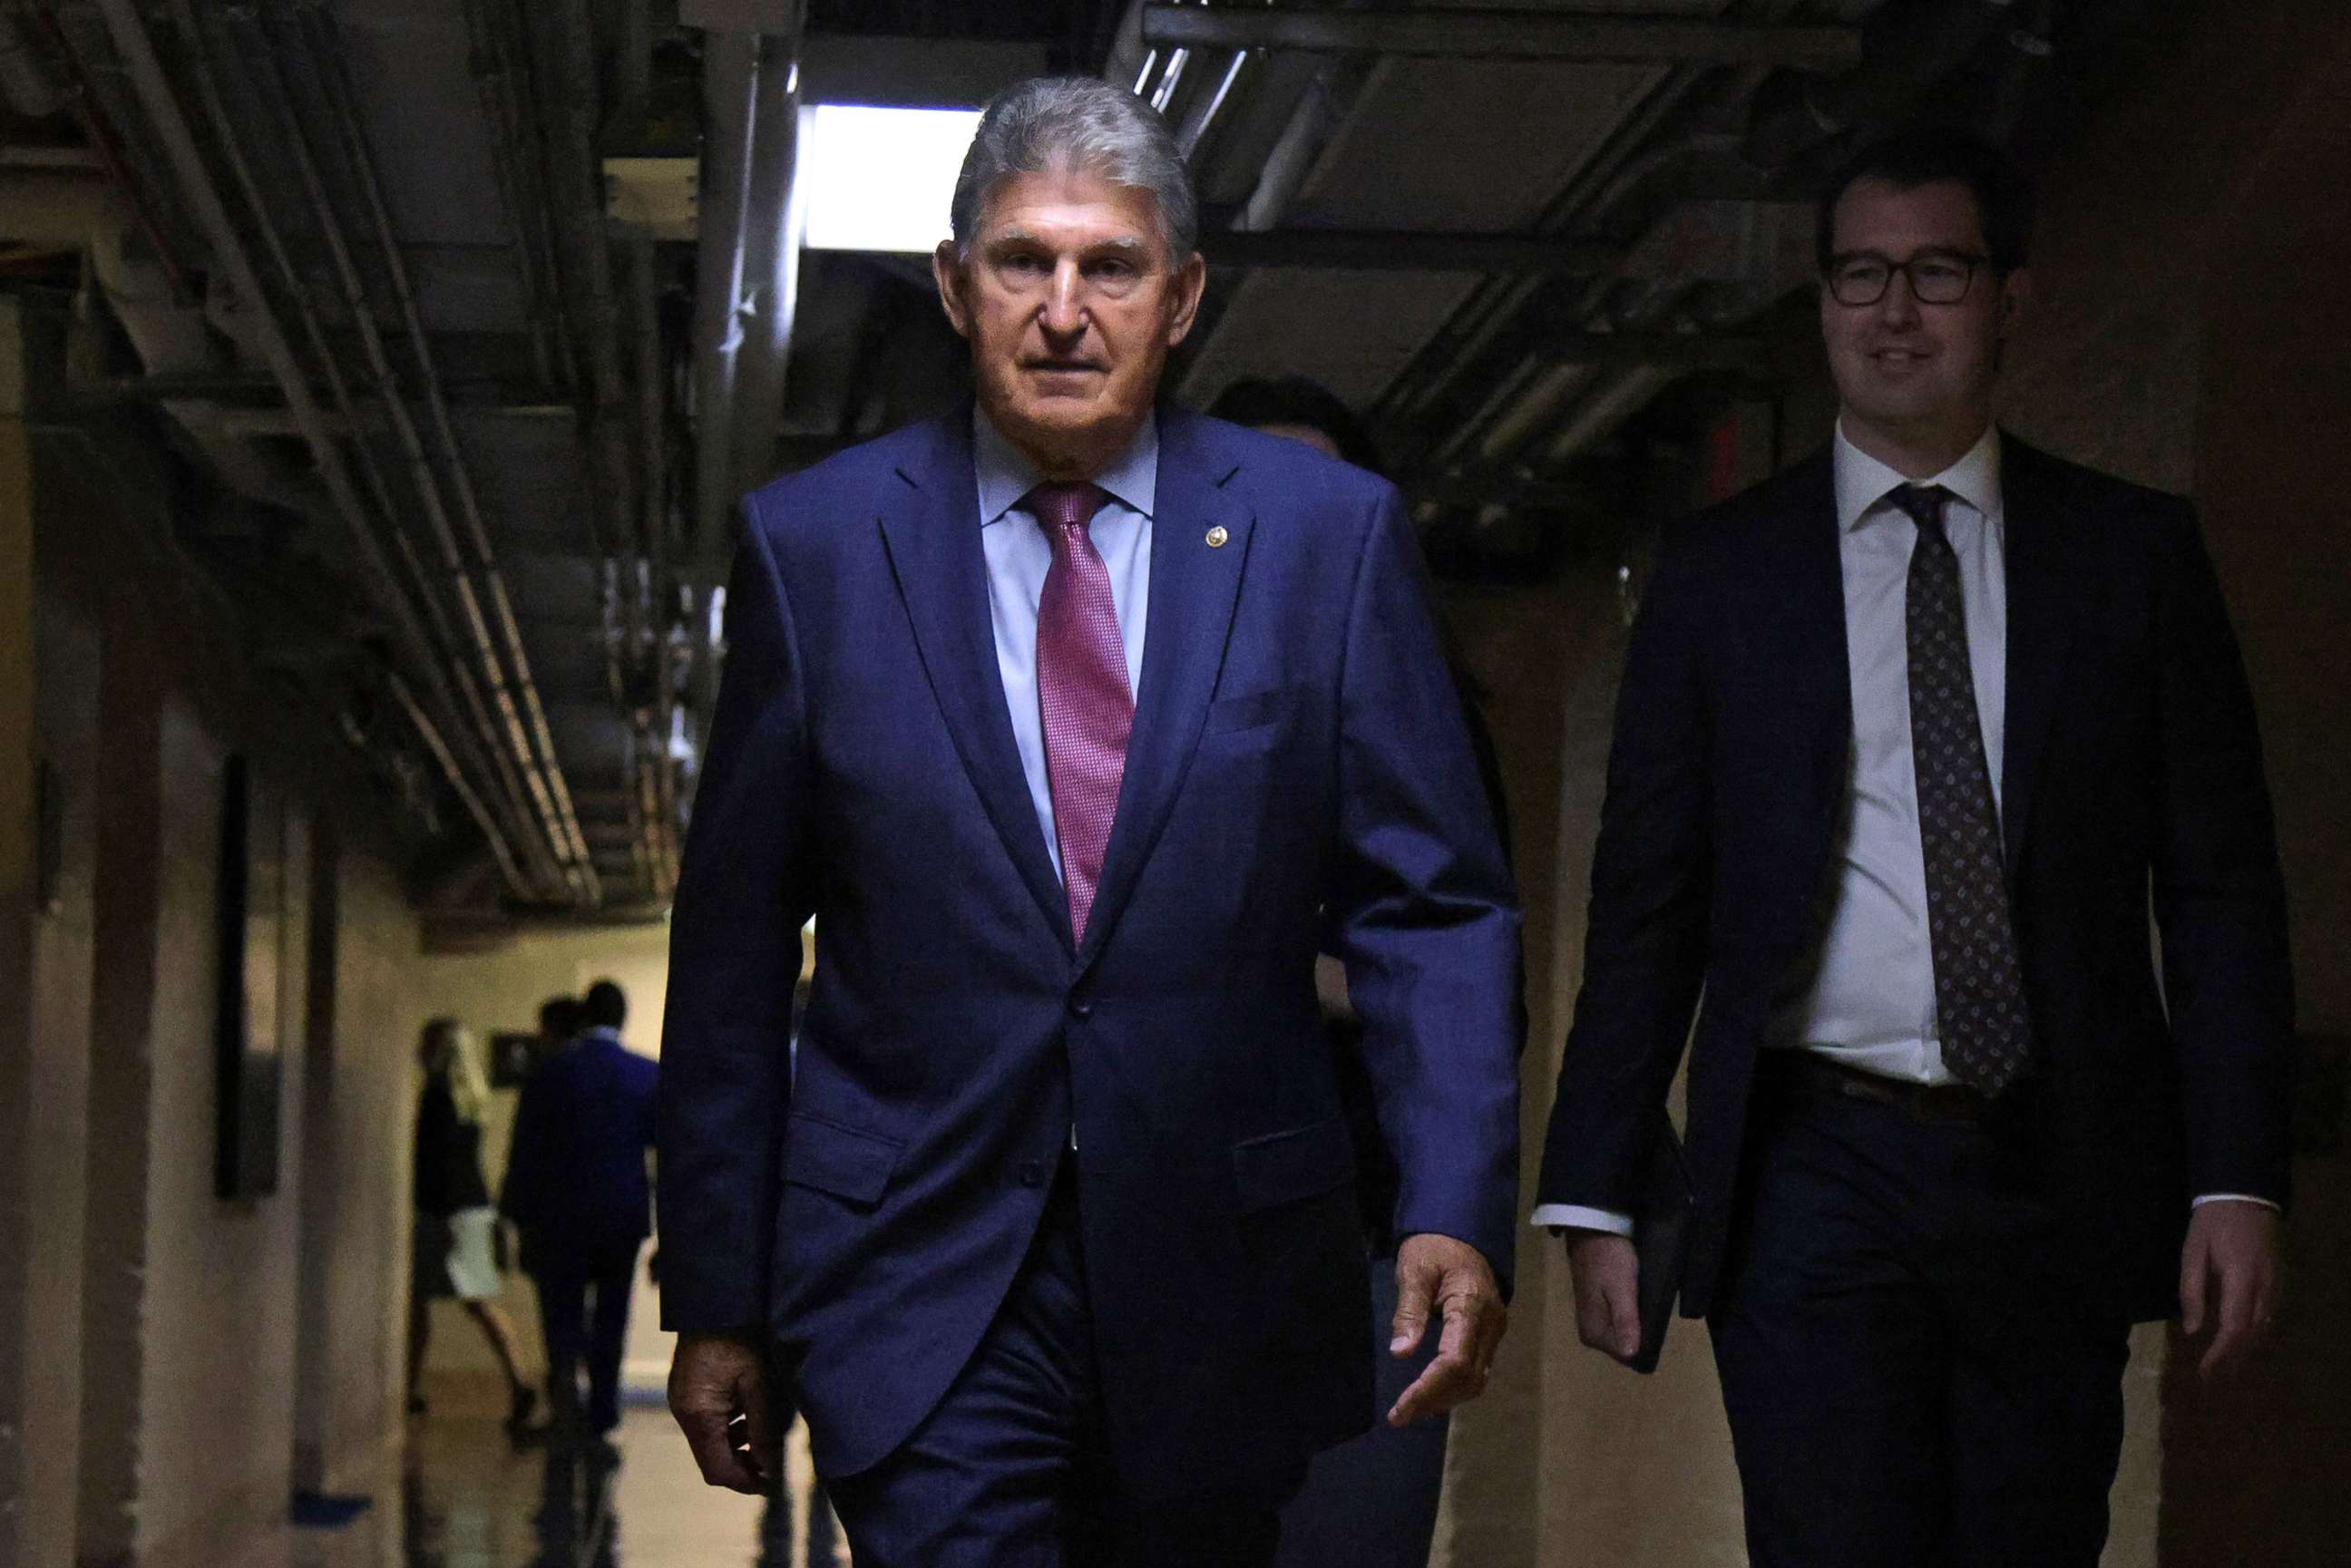 PHOTO: Sen. Joe Manchin arrives to meet with members of Texas House Democratic Caucus at the Capitol. July 15, 2021 in Washington, D.C. They aim to meet with Senate members to discuss voting rights after fleeing Texas to block a voting restrictions bill.